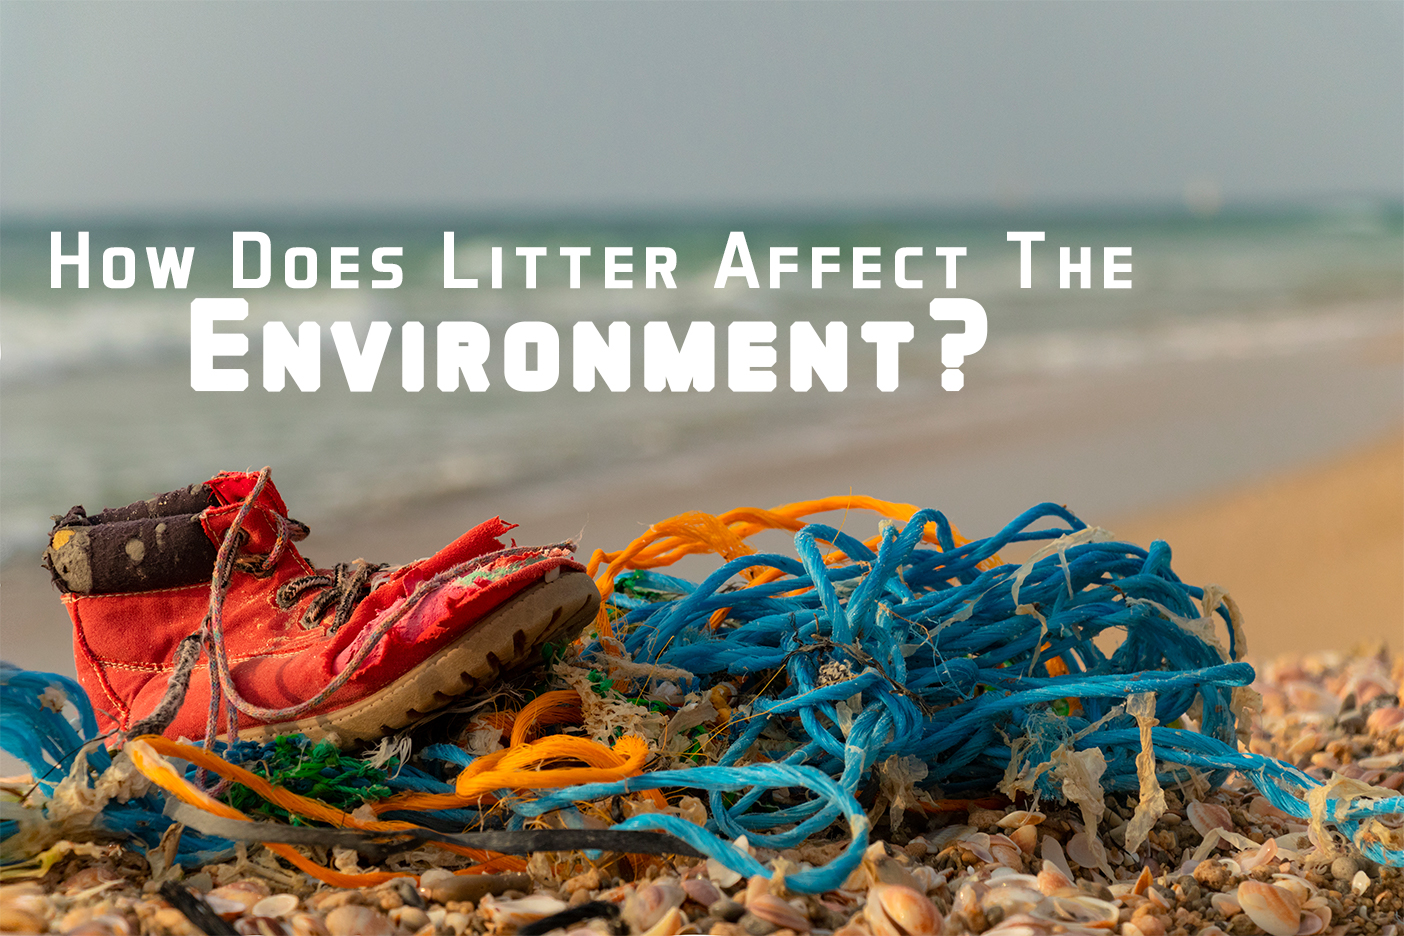 How Does Littering Affect the Environment